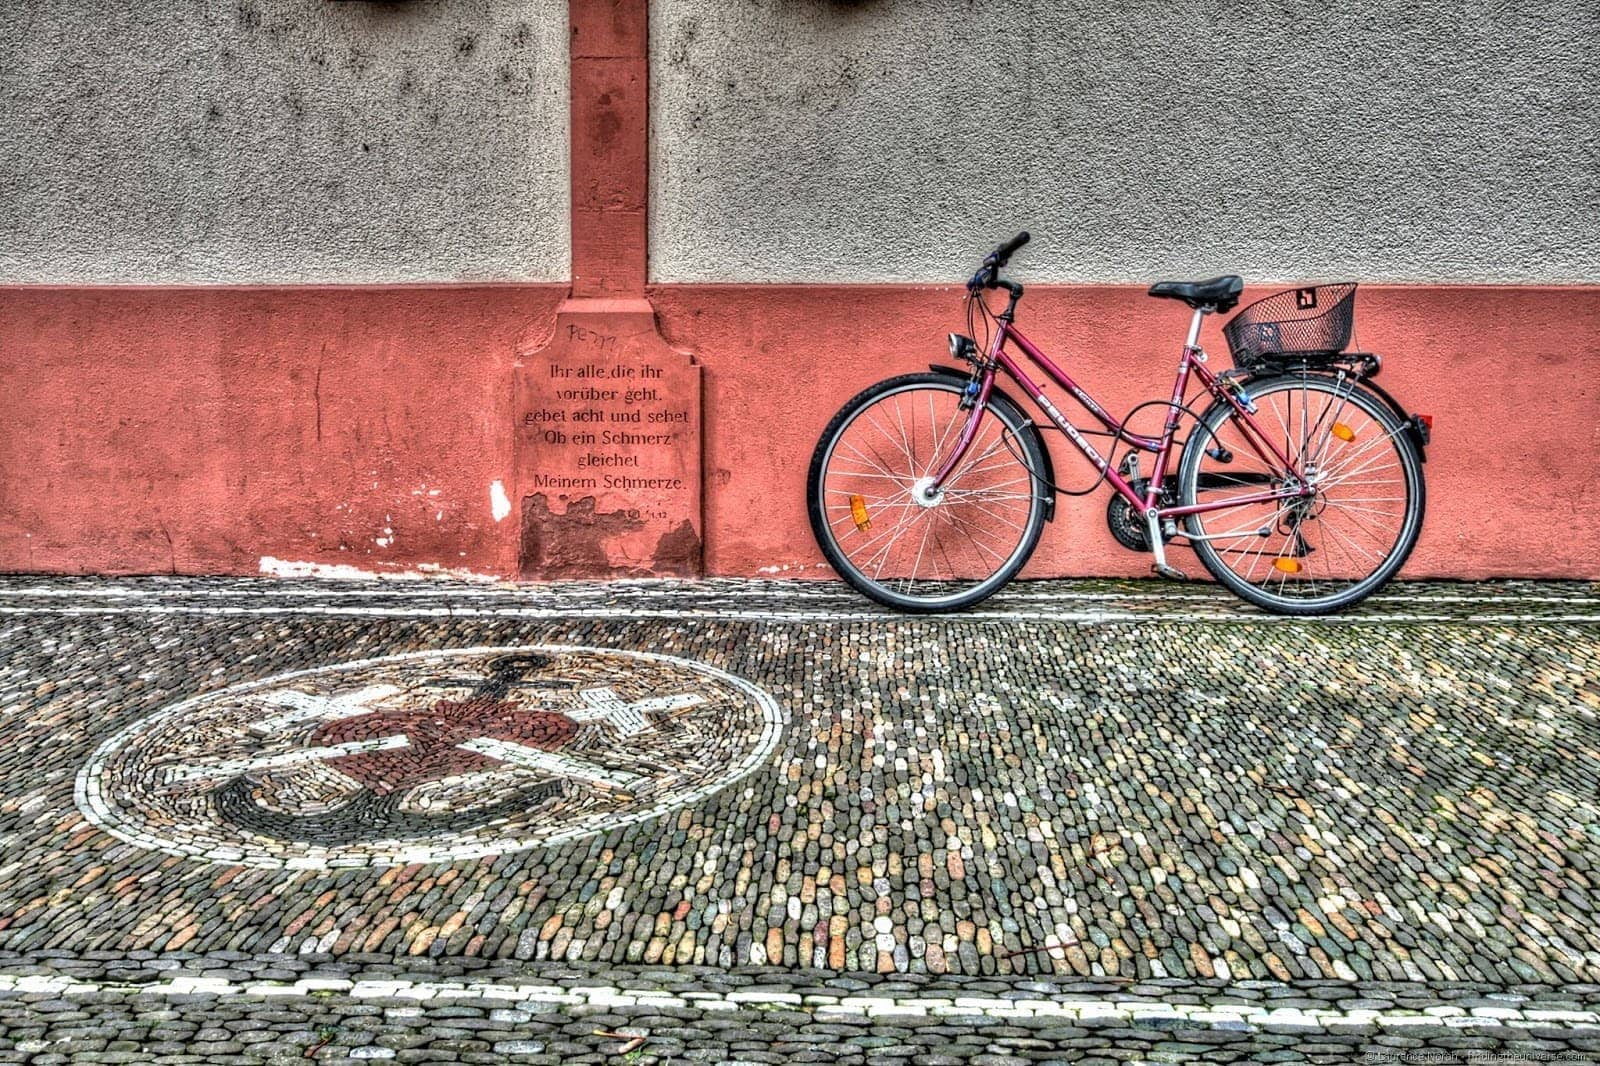 Bicycle in Freiburg